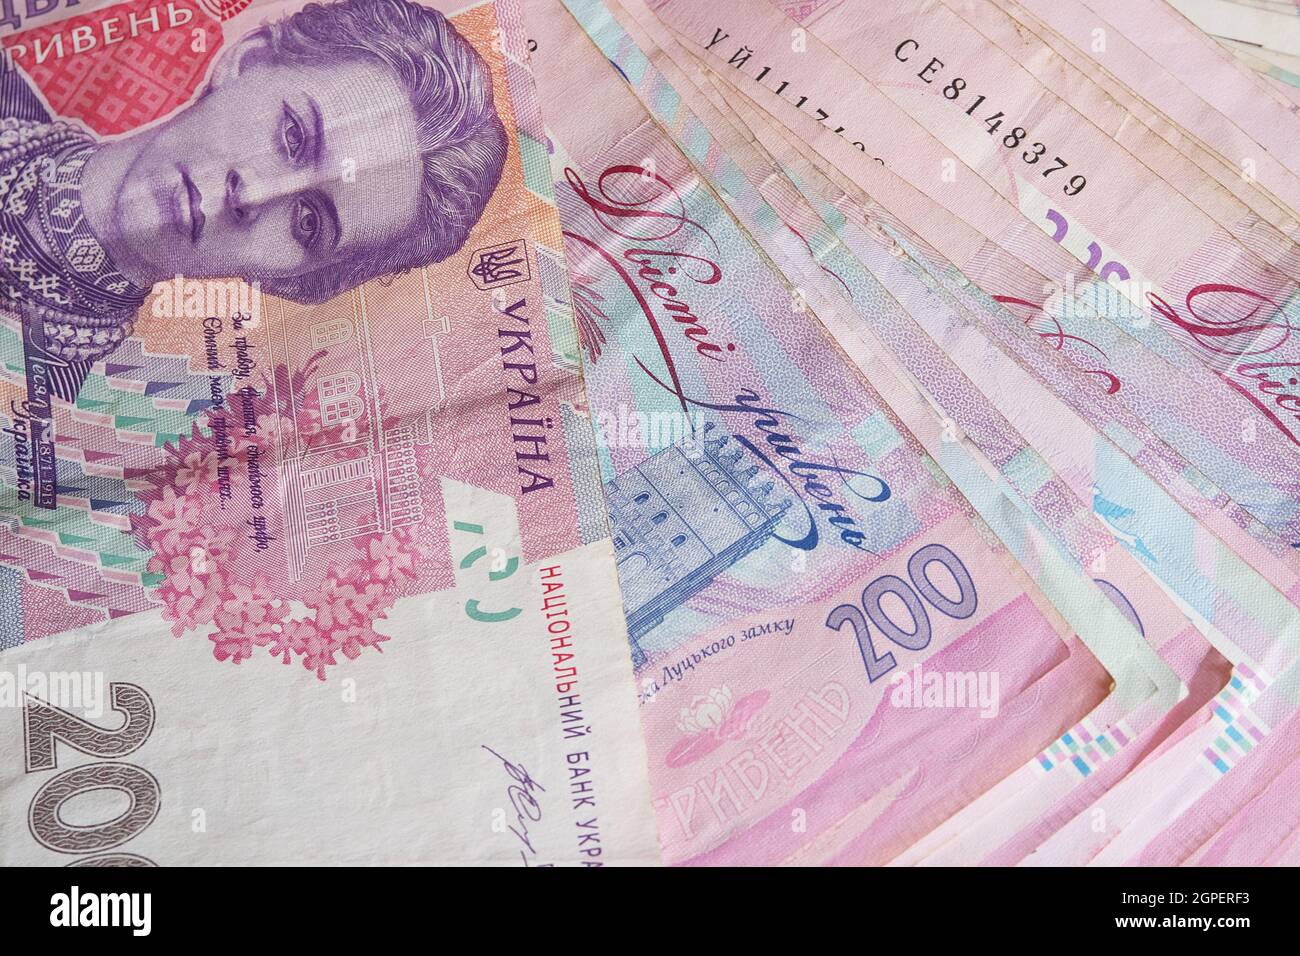 A bunch of banknotes with a face value of two hundred hryvnias. Ukrainian money. Stock Photo